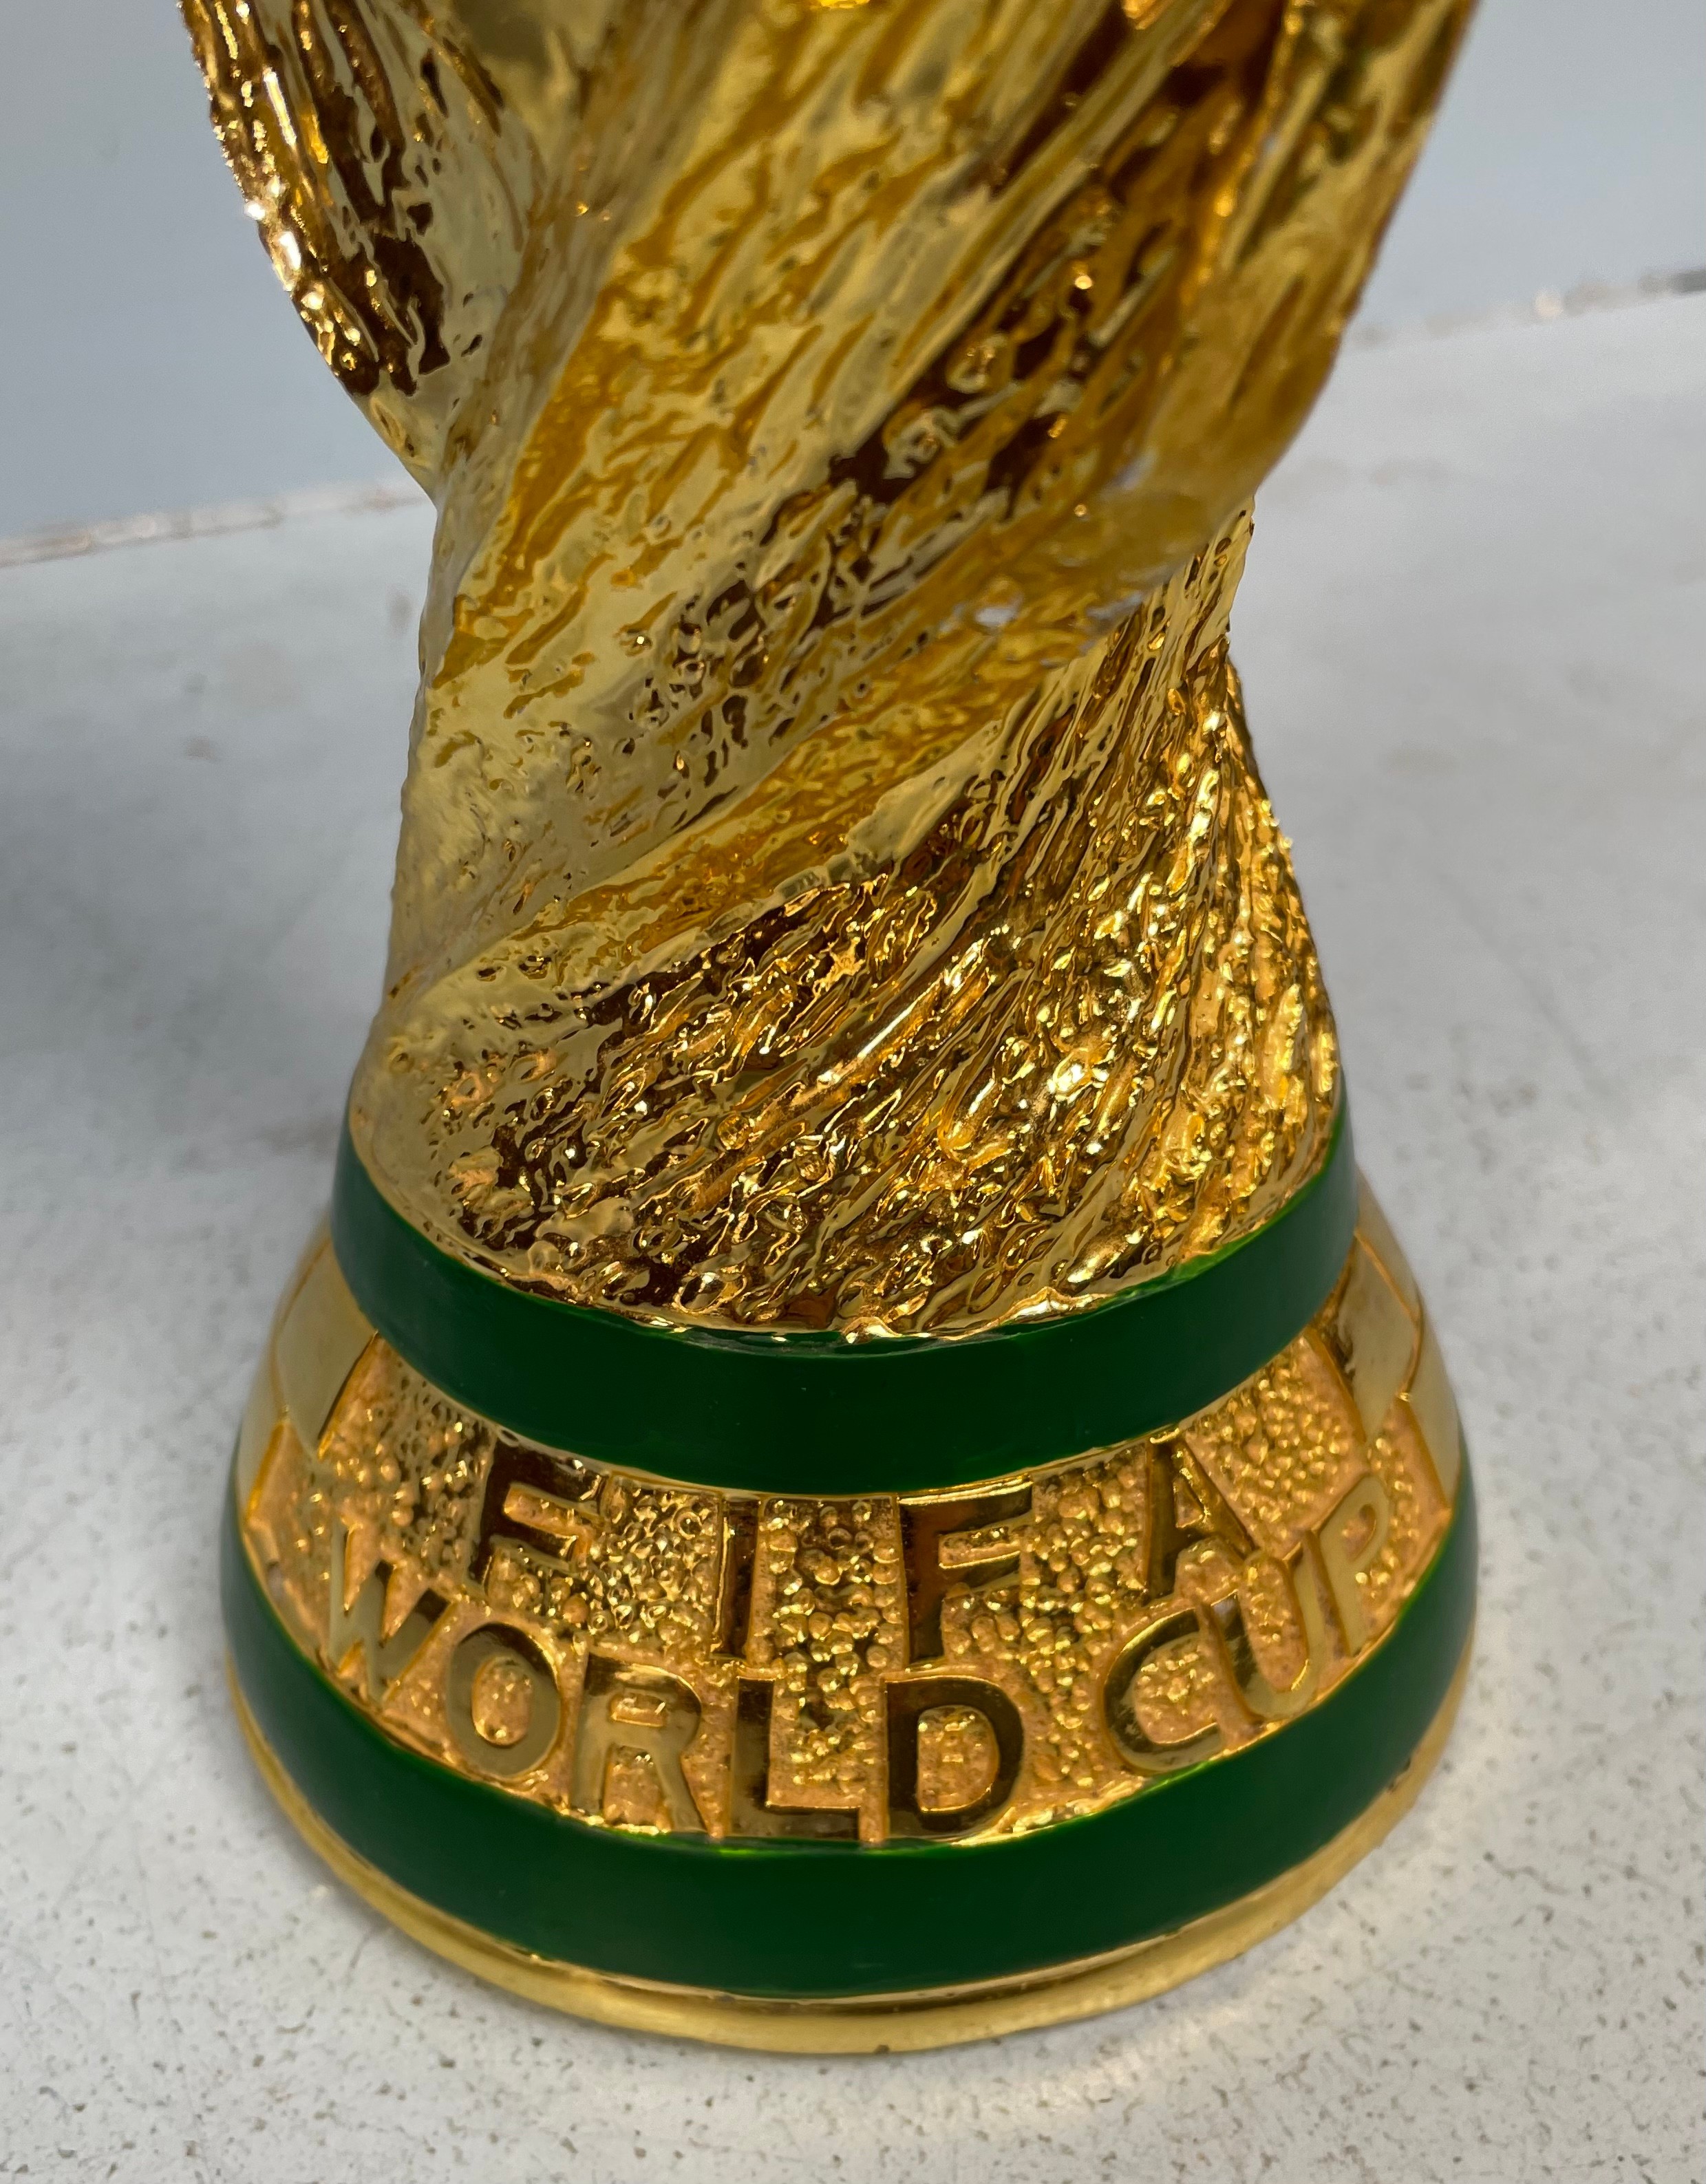 A large replica of the Fifa World Cup trophy, after Silvio Gazzaniga, with two maidens holding a - Image 3 of 3